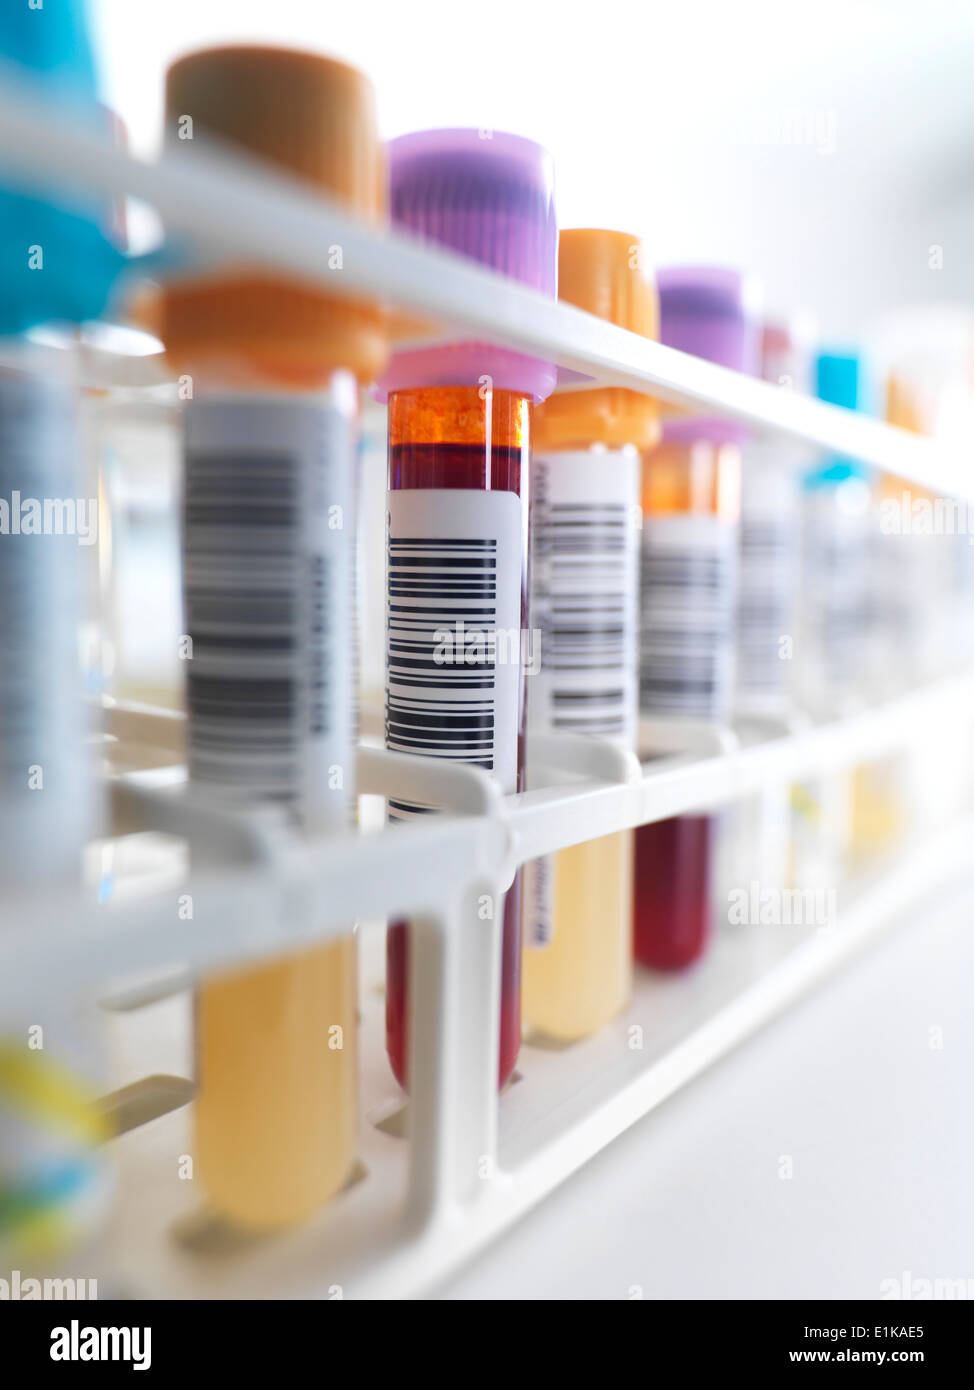 Blood samples in a test tube rack. Stock Photo